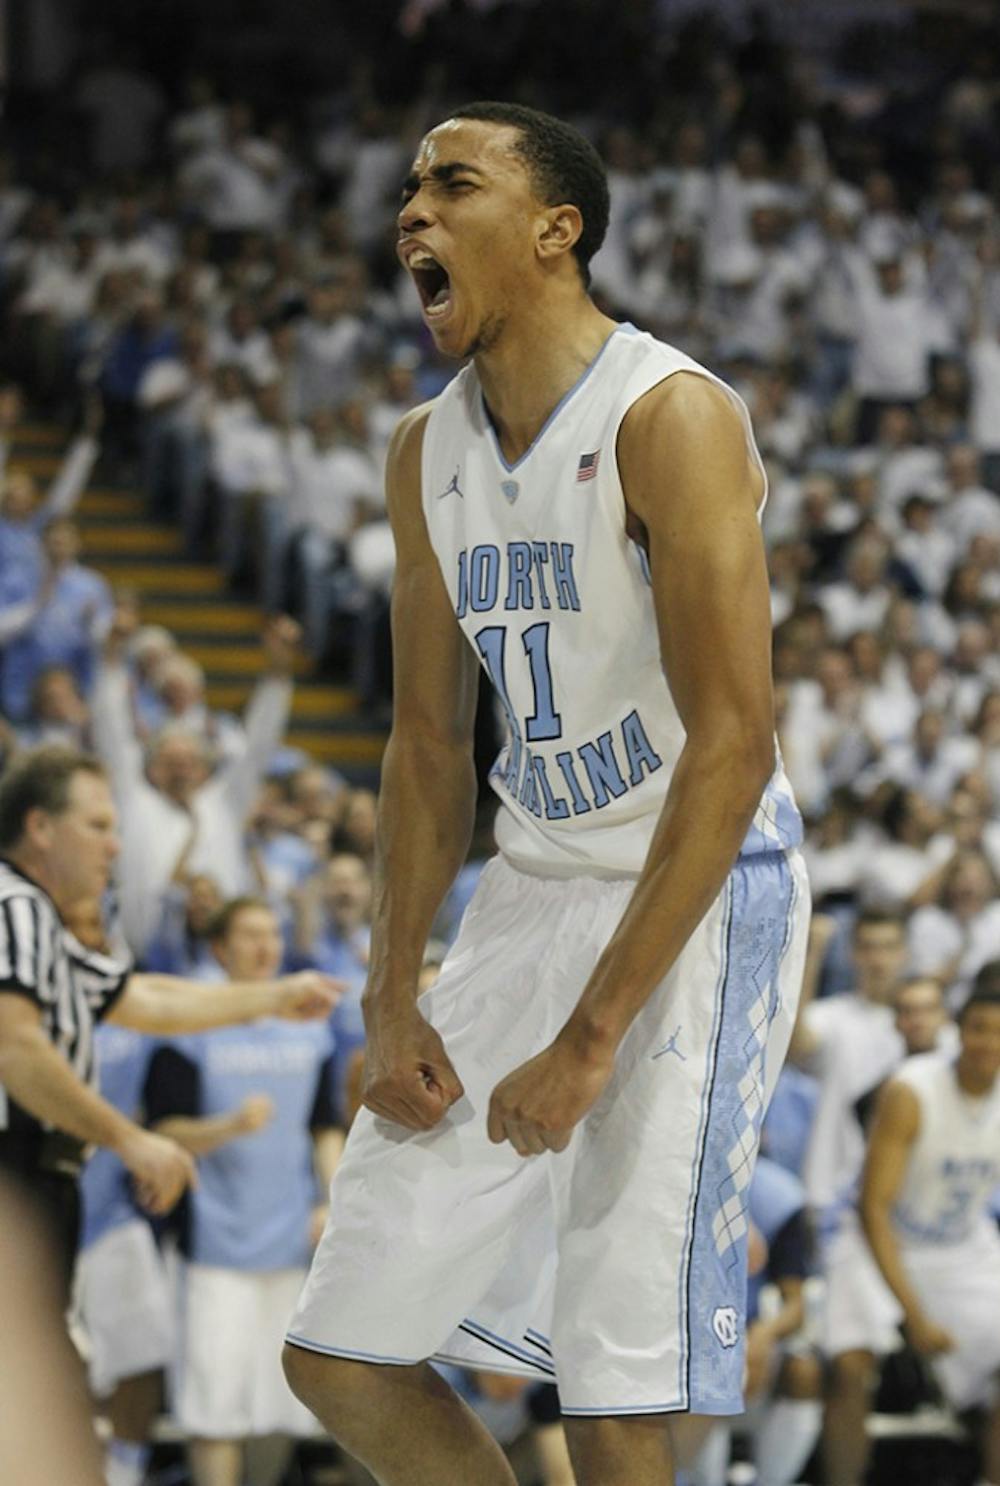 UNC forward Brice Johnson (11) reacts after scoring a basket despite a foul. Johnson finished the game with 13 points and 5 blocks.